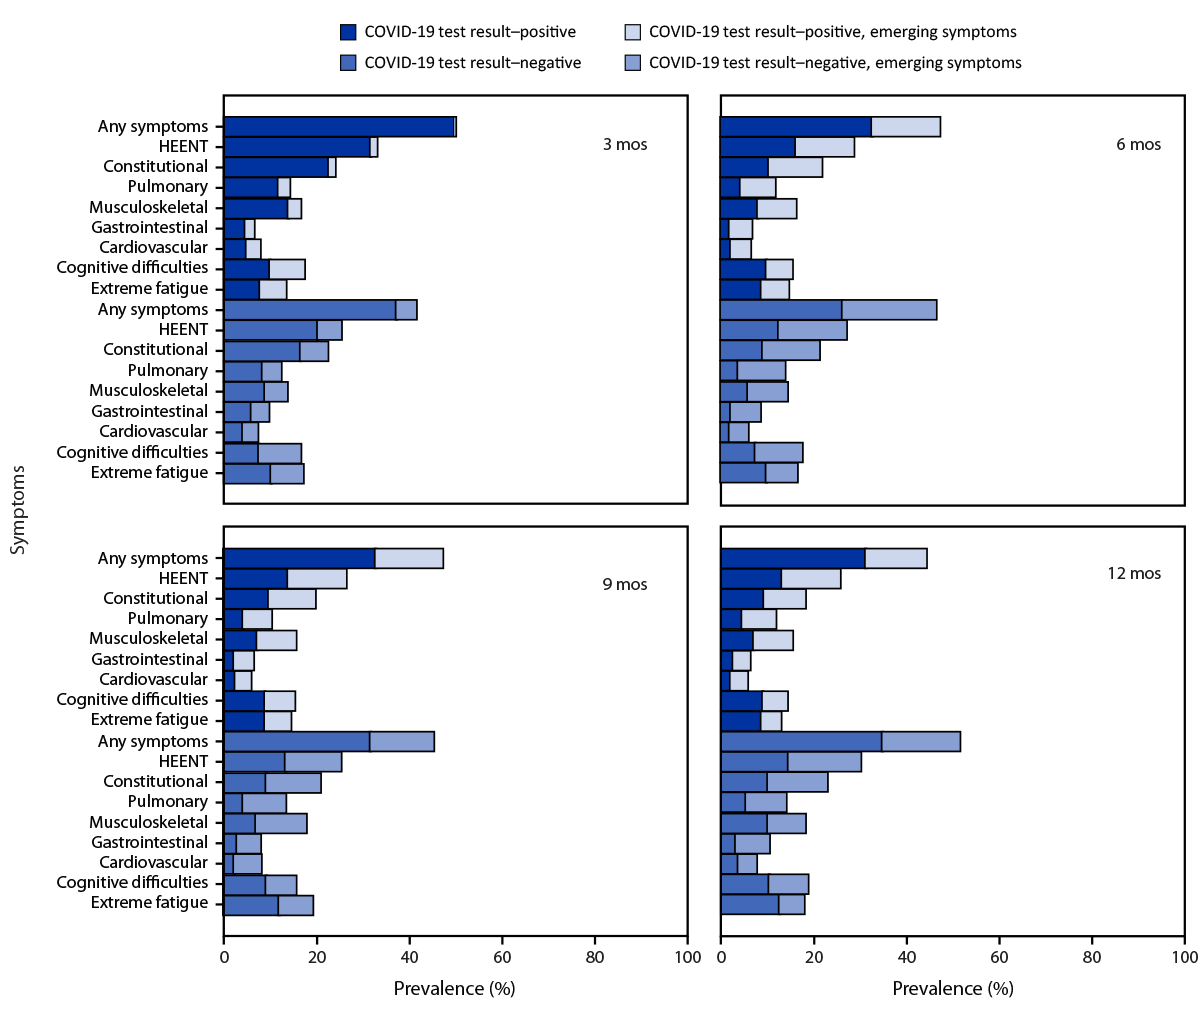 The figure comprises 4 histograms indicating self-reported prevalence of emerging and reemerging symptoms during 12 months among U.S. adults with an acute COVID-like illness with no evidence of new or reinfection by SARS-CoV-2 test result status during December 2020–March 2023 according to the Innovative Support for Patients with SARS-CoV-2 Infections Registry.